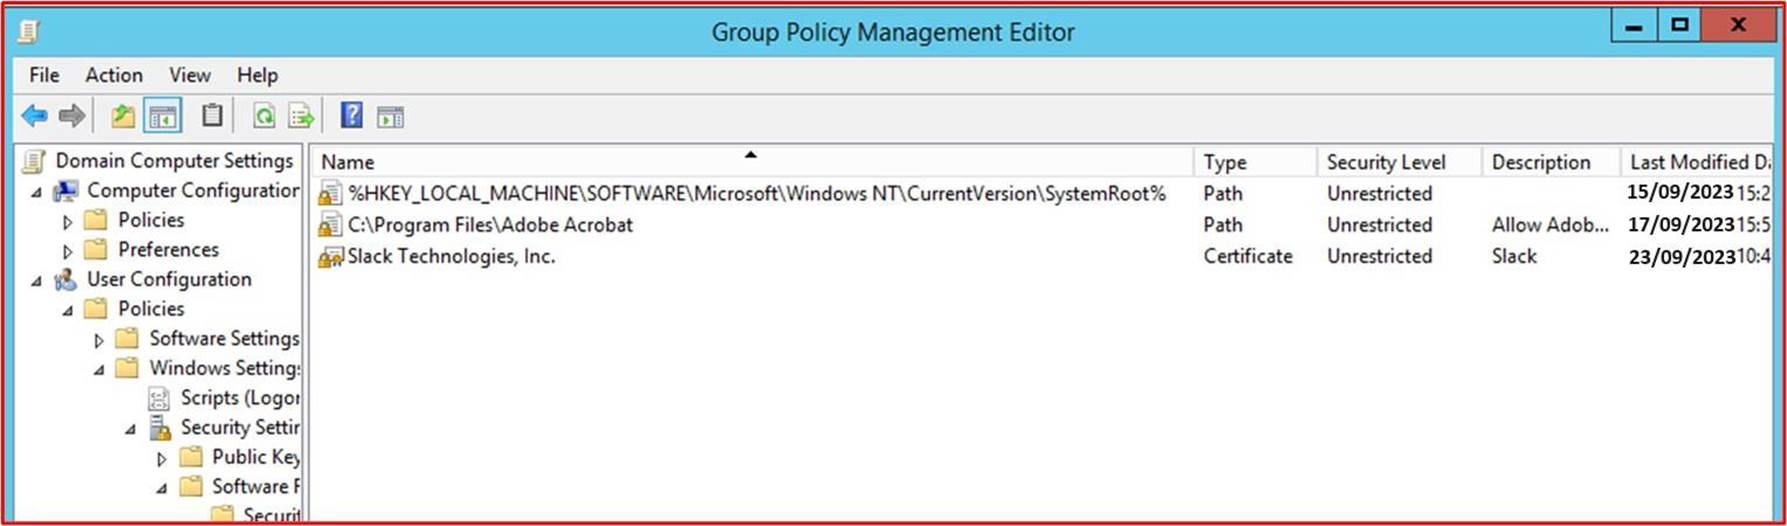 Group policy management editor.